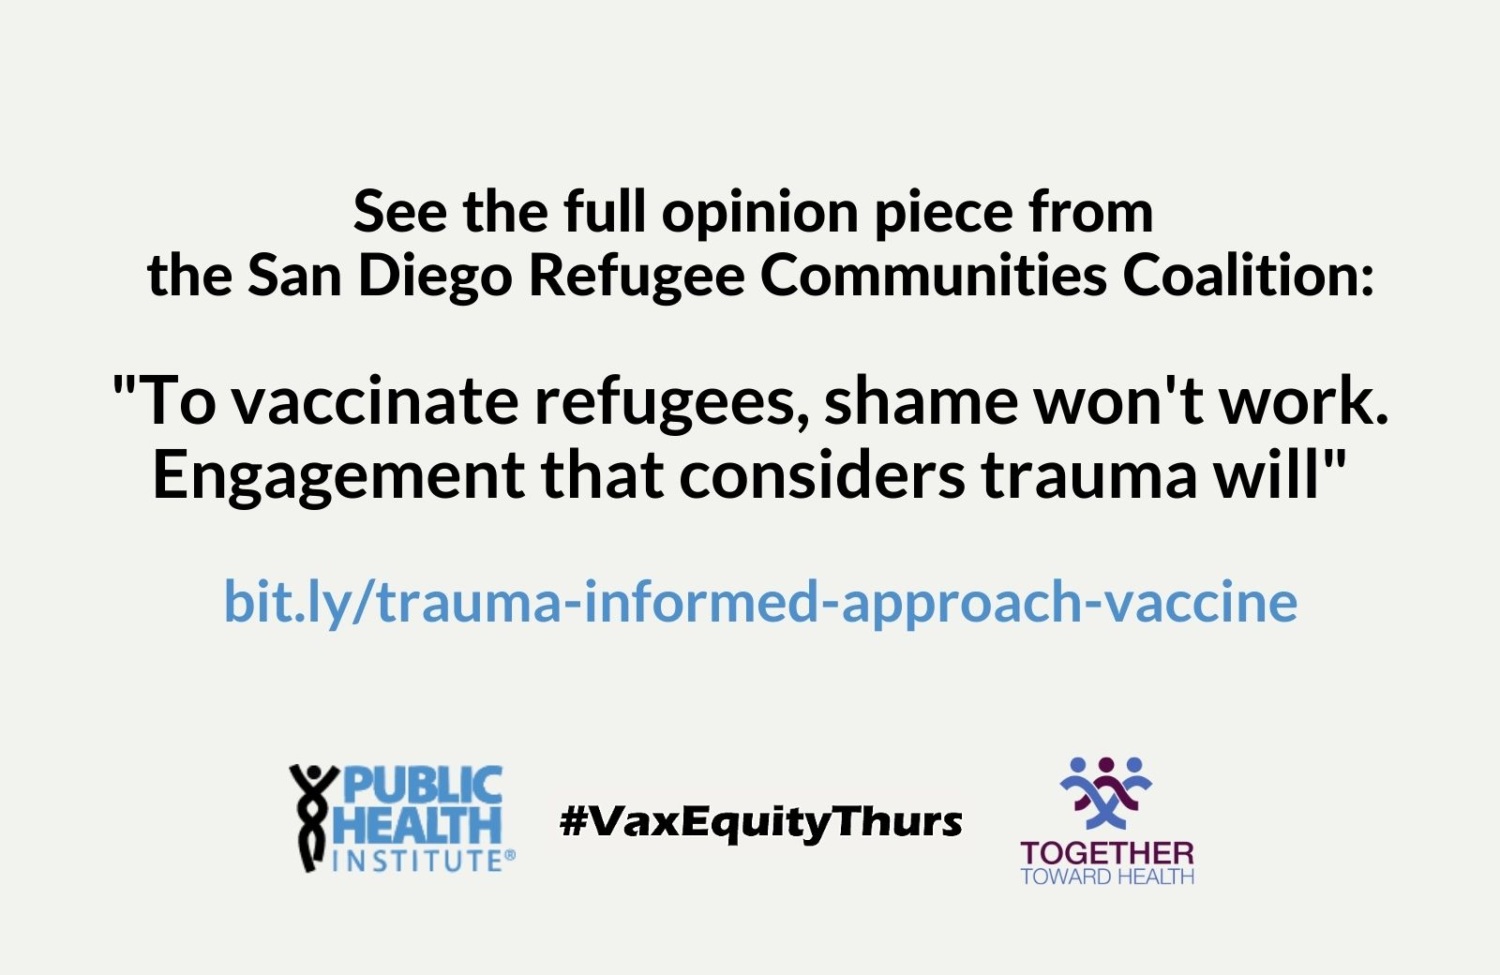 See the full opinion piece from the San Diego Refugee Communities Coalition: "To vaccinate refugees, shame won't work. Engagement that considers trauma will" bit.ly/trauma-informed-approach-vaccine